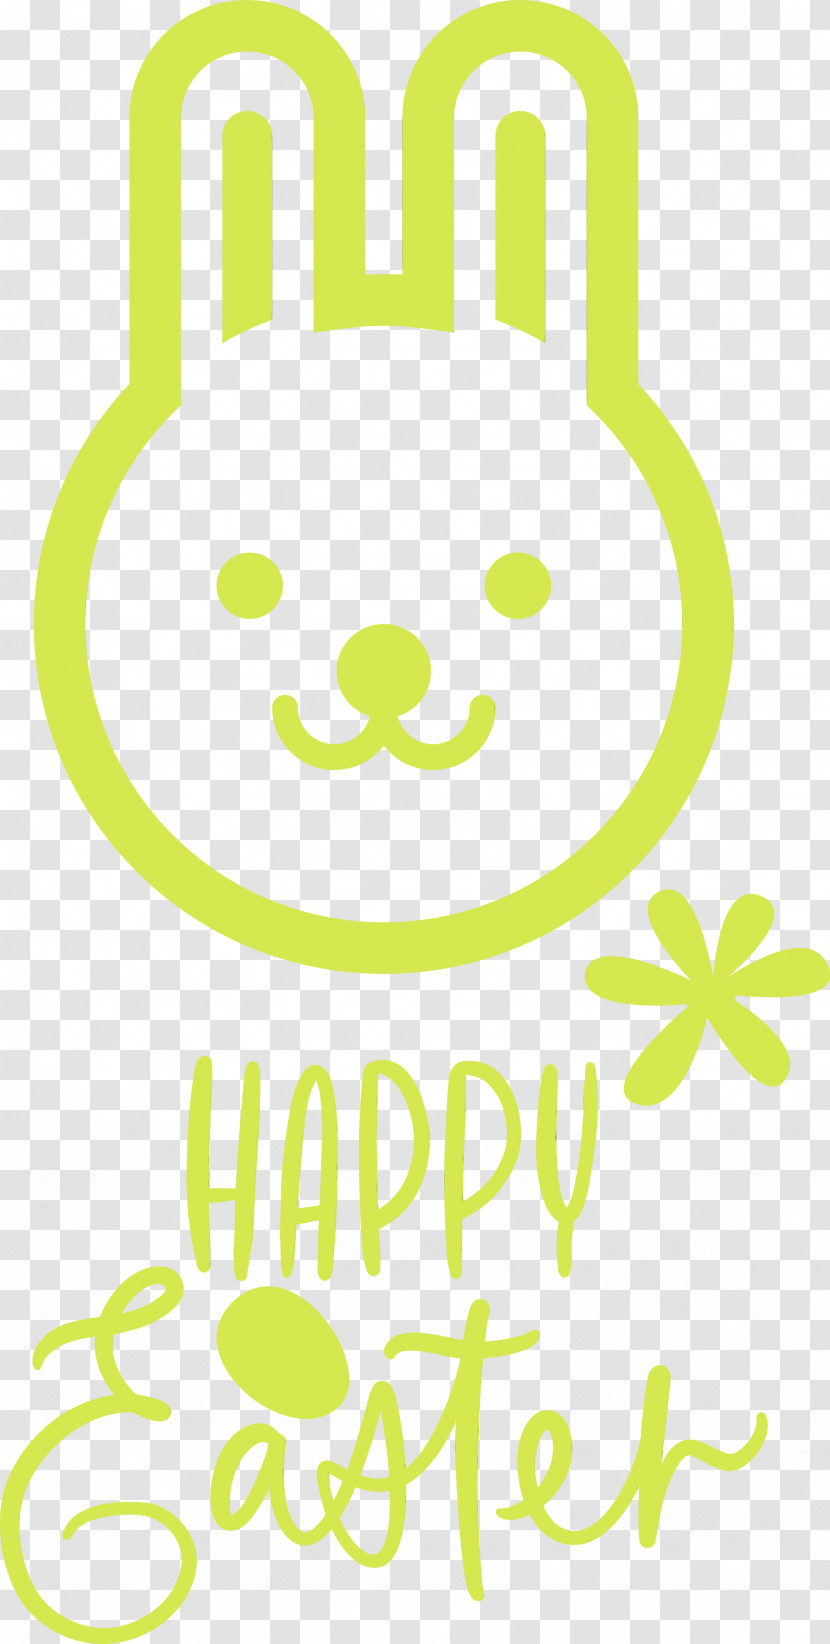 Green Yellow Smile Font Transparent PNG